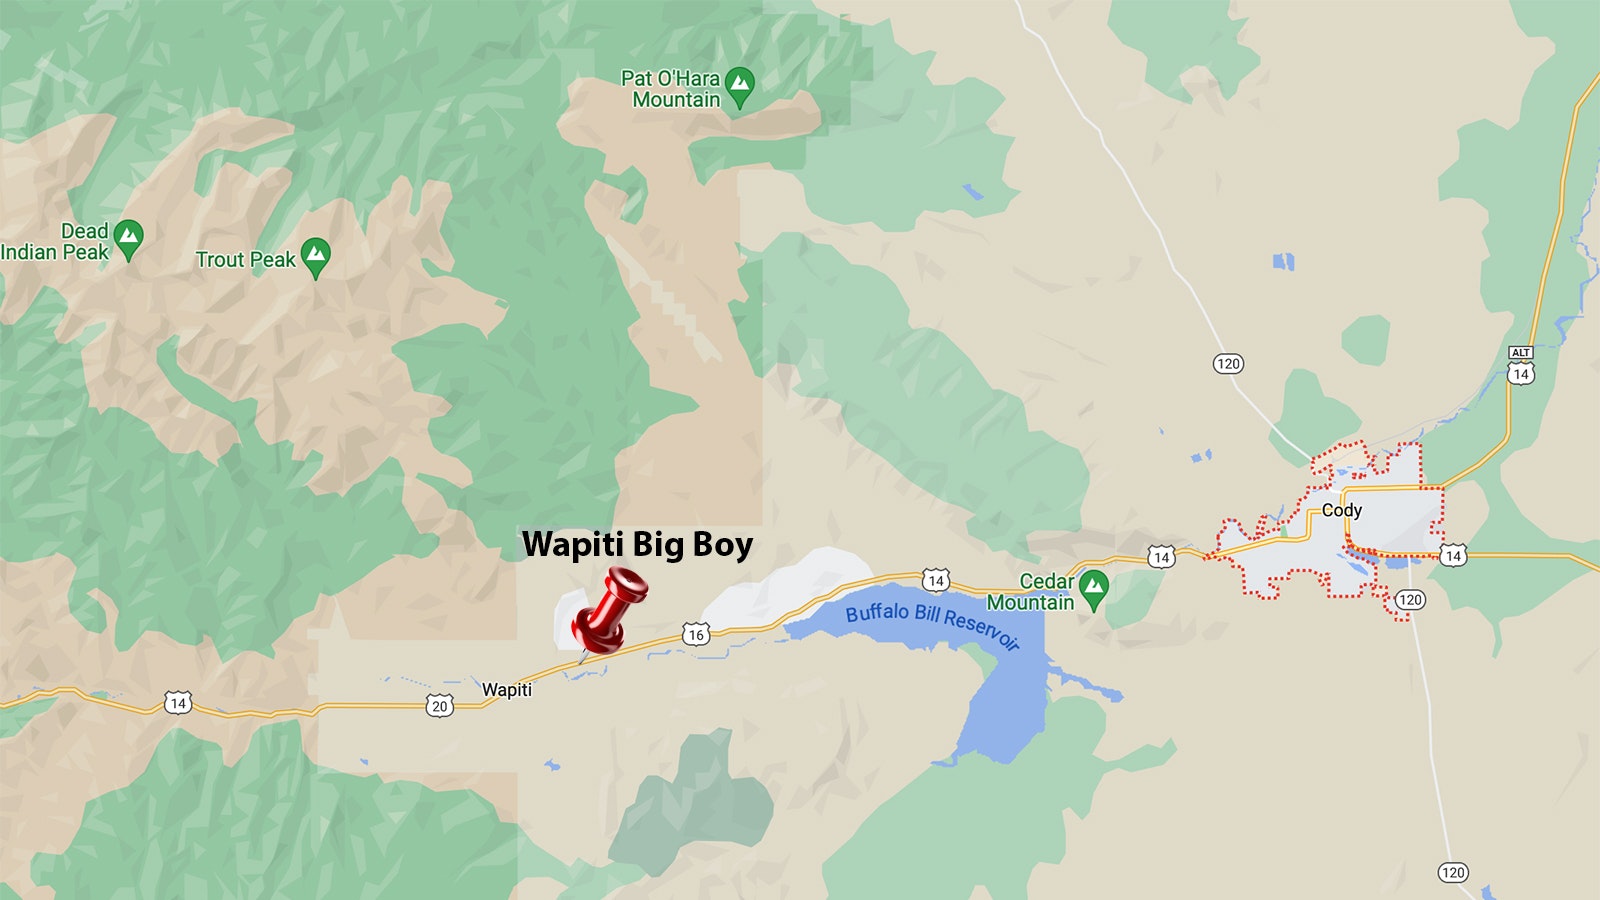 The approximate location of where to look for a glimpse of the Wapiti Big Boy west of Cody along U.S. Highway 14/16/20.